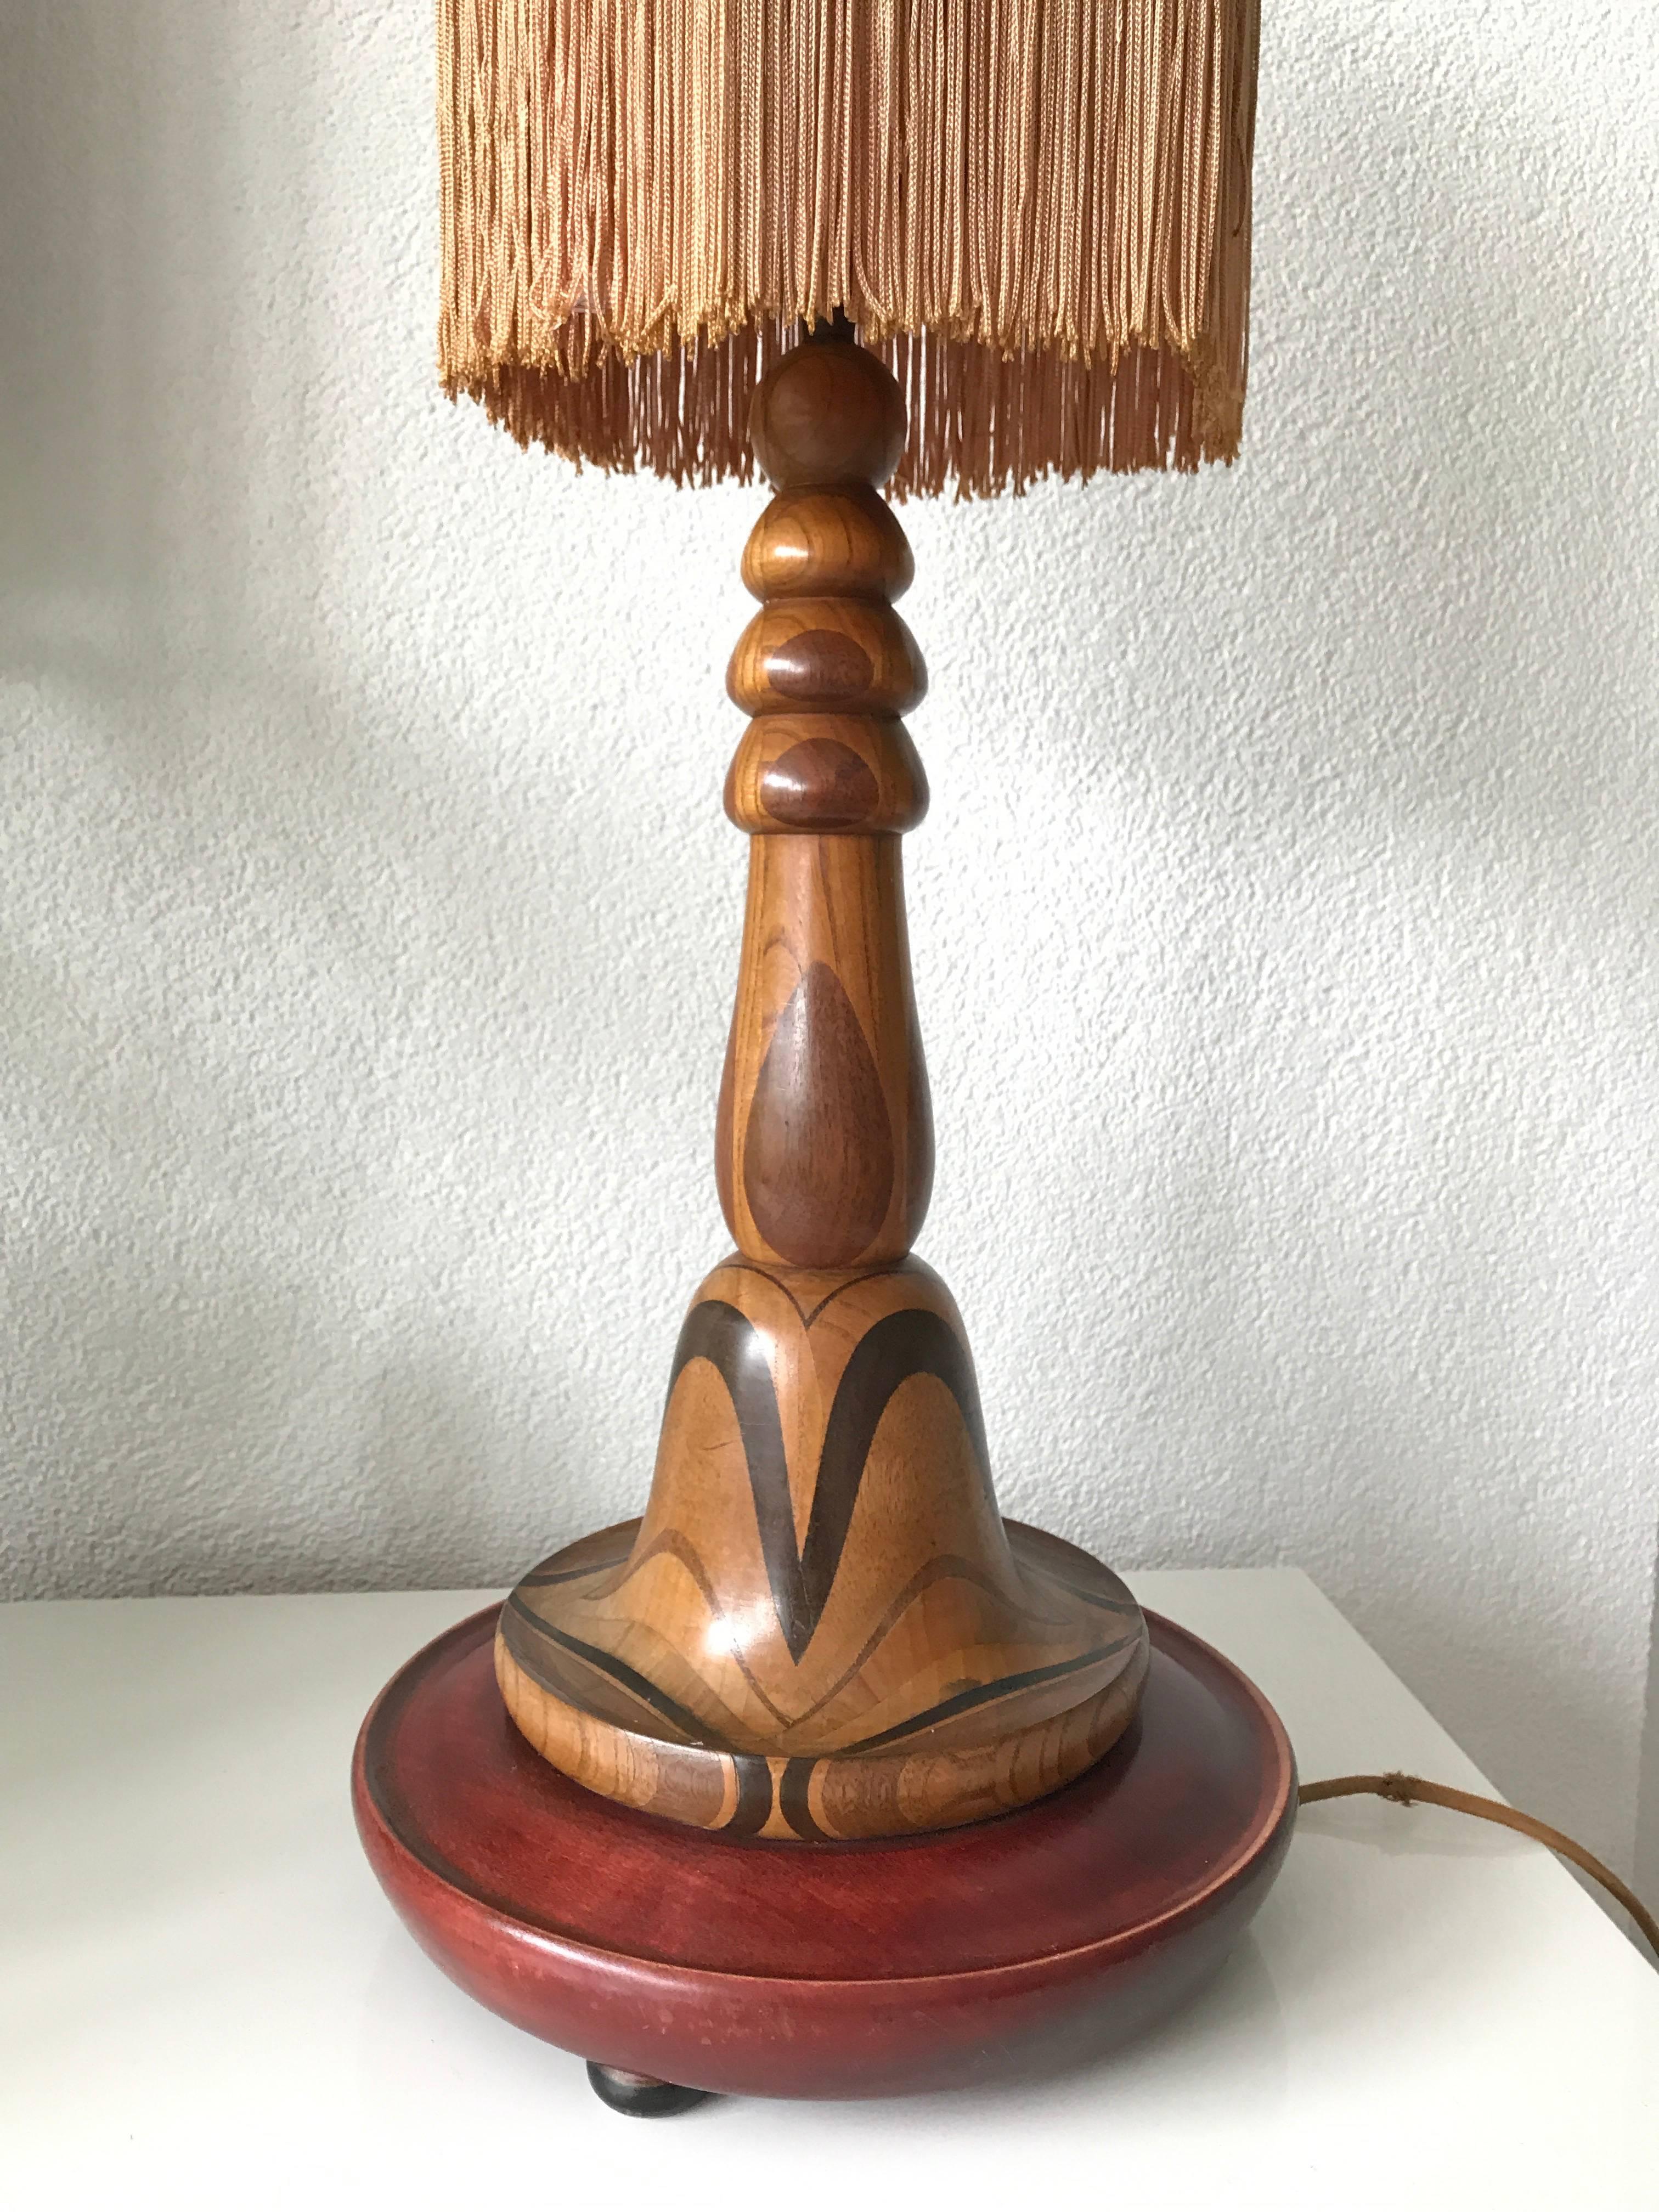 European Rare and Hand-Crafted Art Deco Desk or Table Lamp with Stunning Wood Motifs For Sale